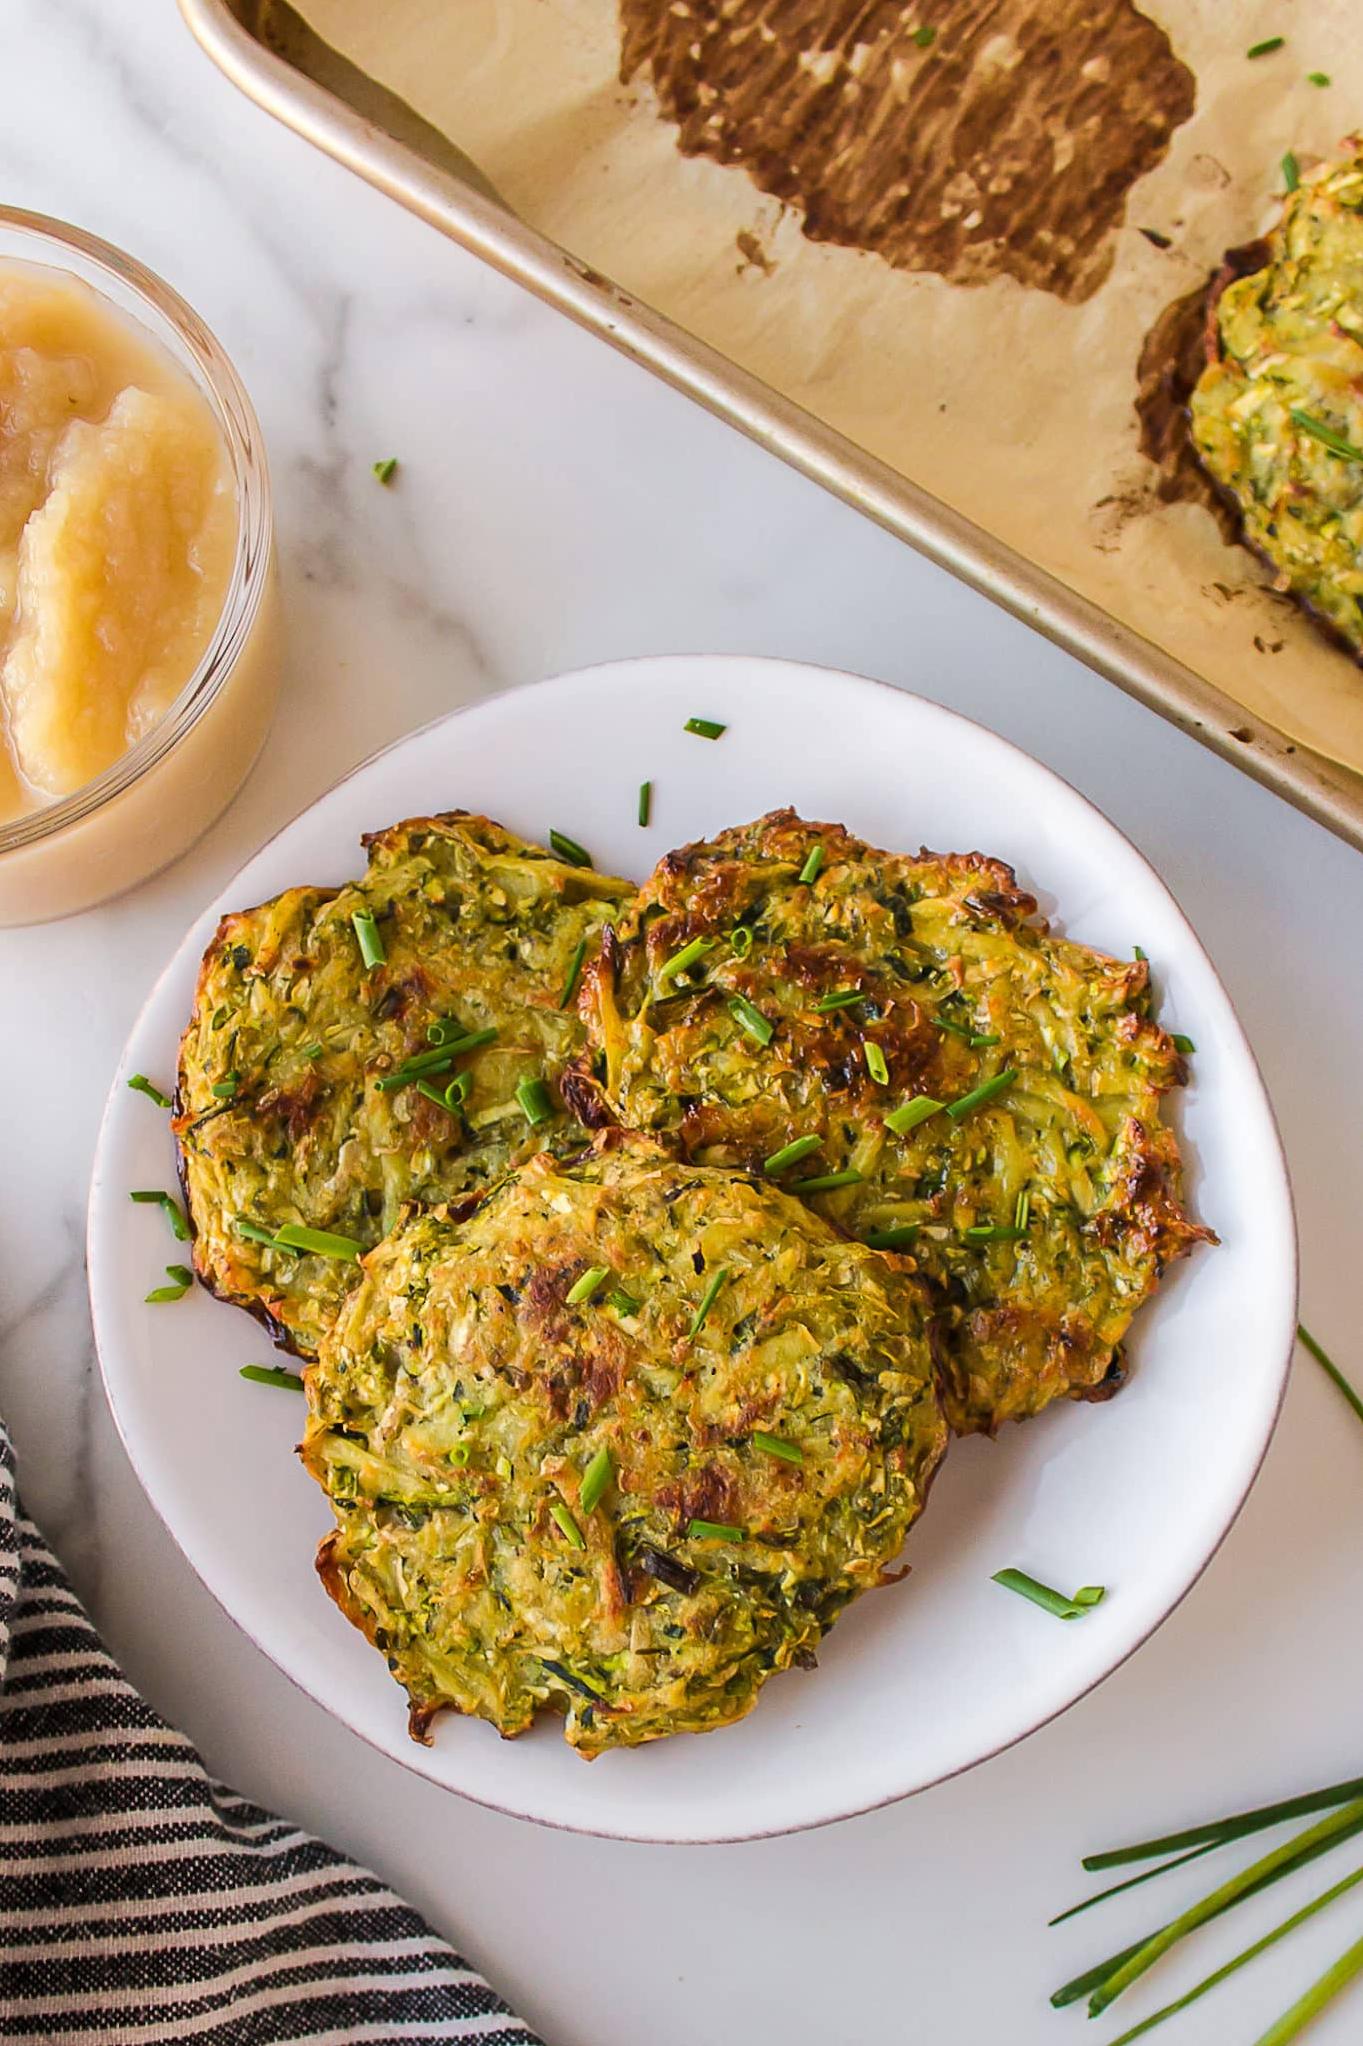  Perfectly crispy on the outside, soft and chewy on the inside - these baked latkes are too good to resist.